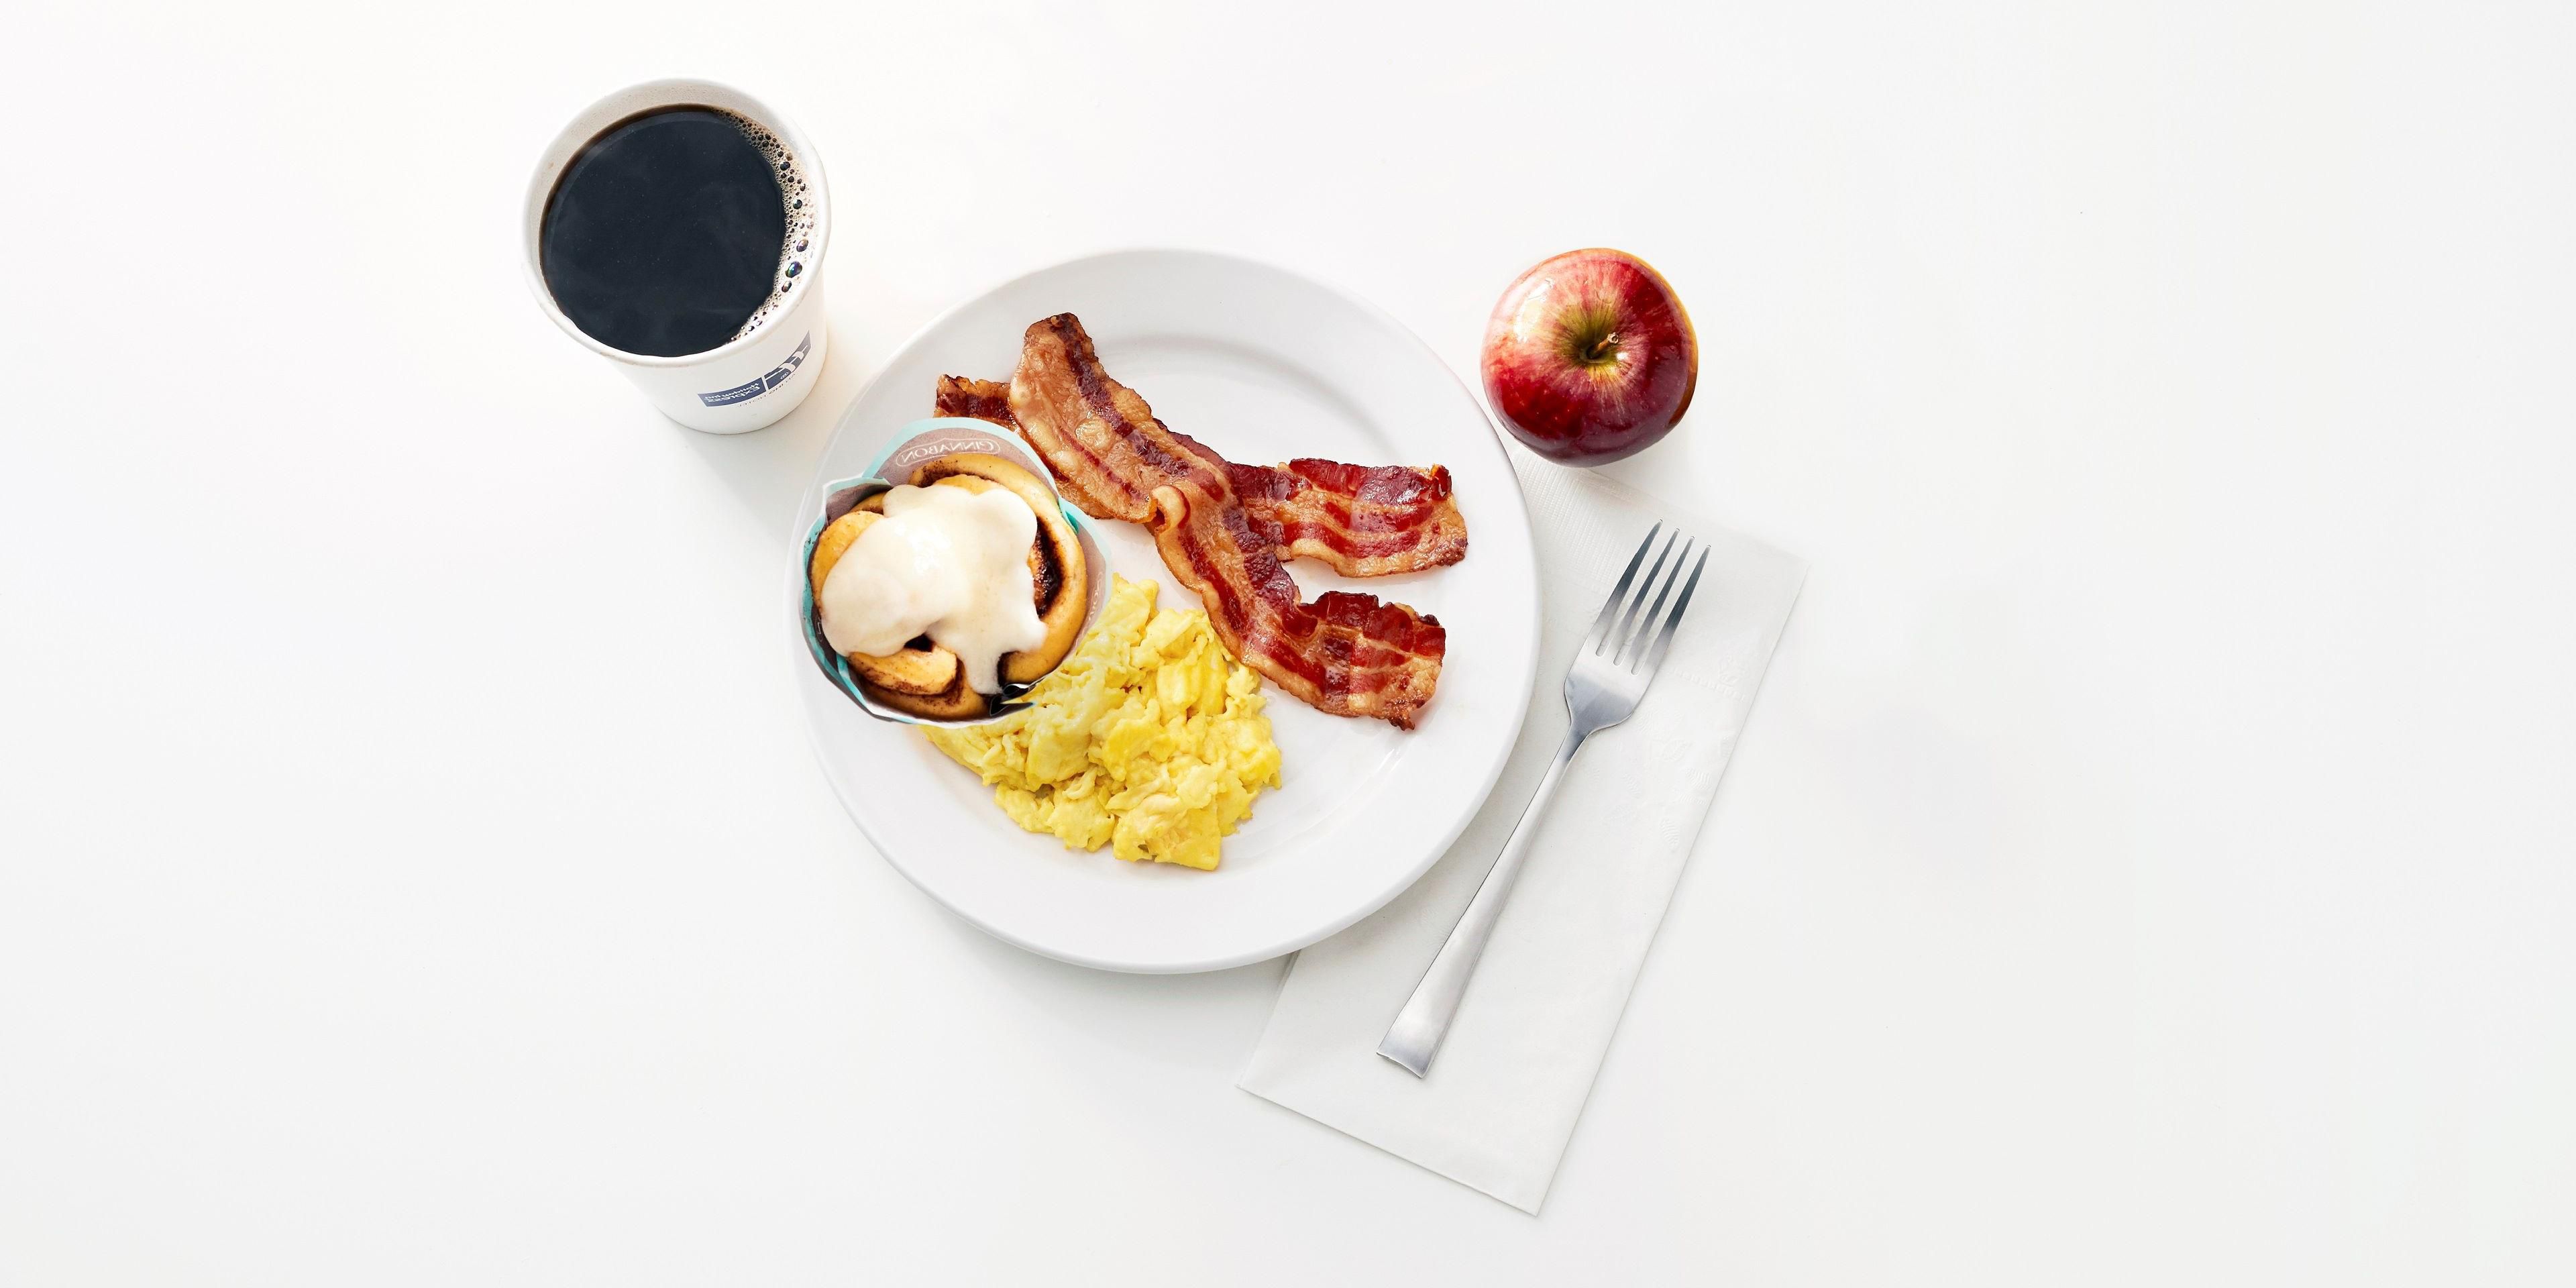 Kick start your day with our Express Start Breakfast, with grab ‘n’ go options and favorites such as eggs and bacon, hot pancakes, our signature cinnamon rolls and fresh coffee. Offered from 6am - 9am on weekdays and 7am - 10am on weekends.